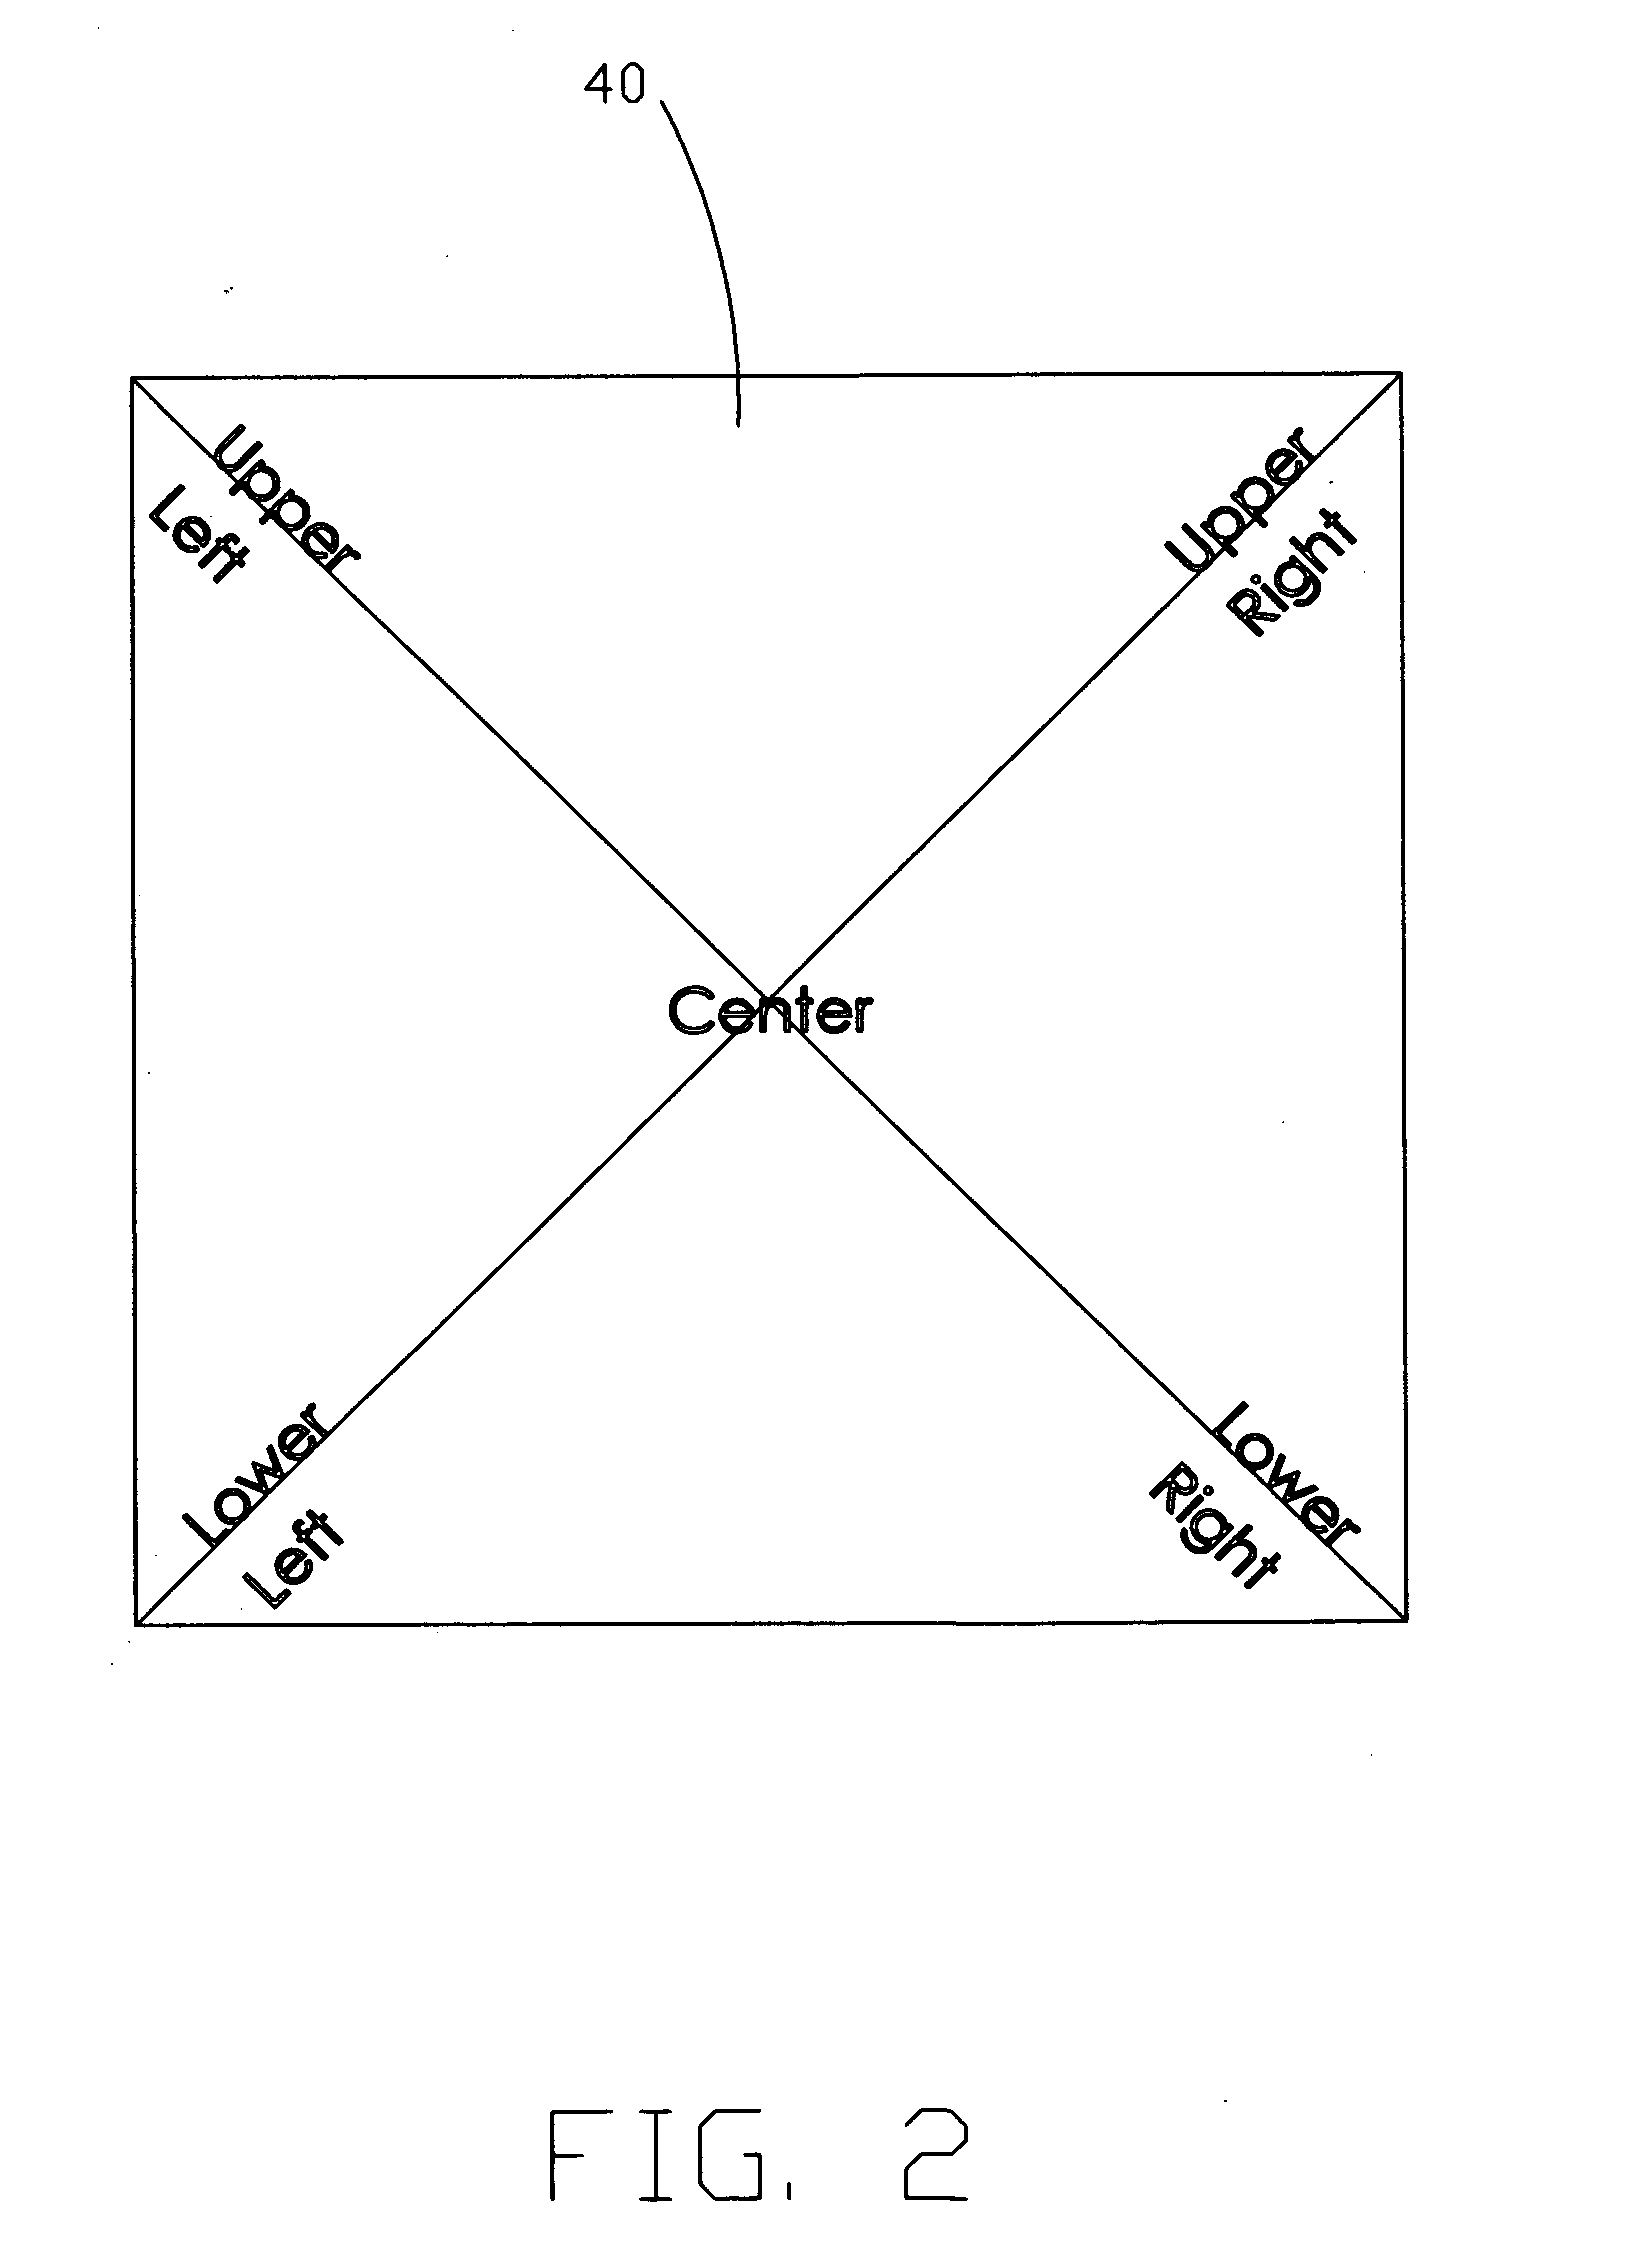 Scrolling and zooming of a portable device display with device motion